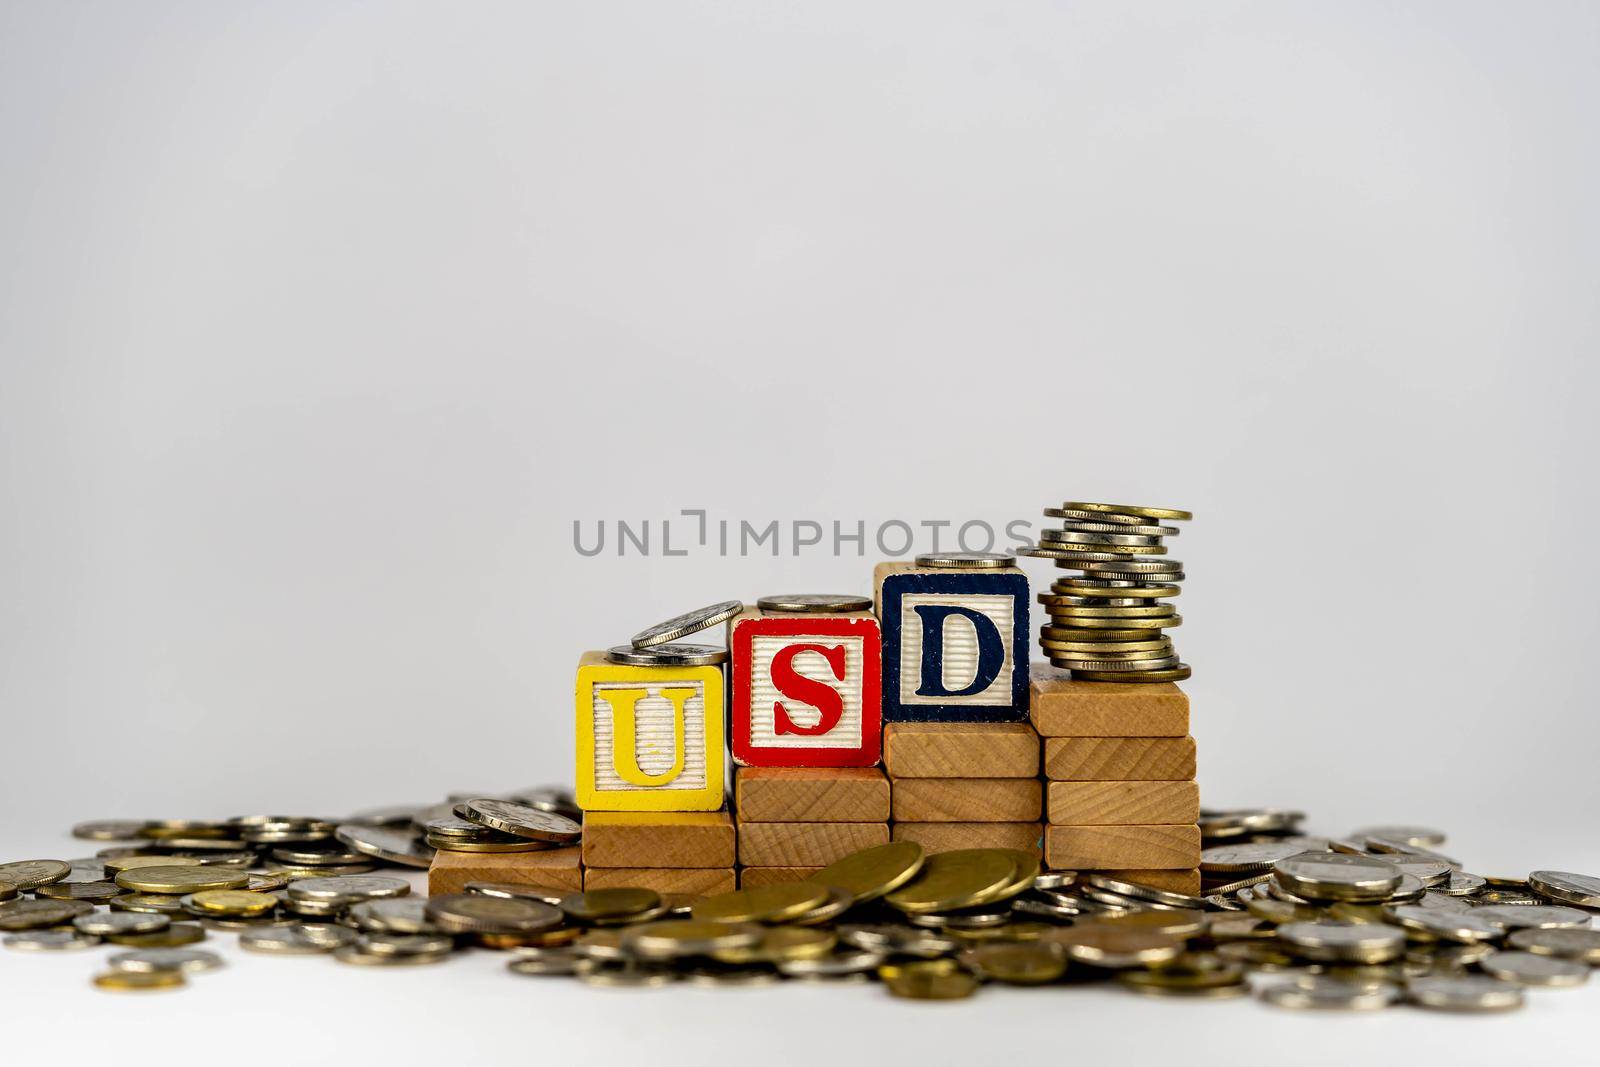 Forex USD concept with wooden blocks and coins. Forx USD letters on wooden blocks sorrounded with money by billroque